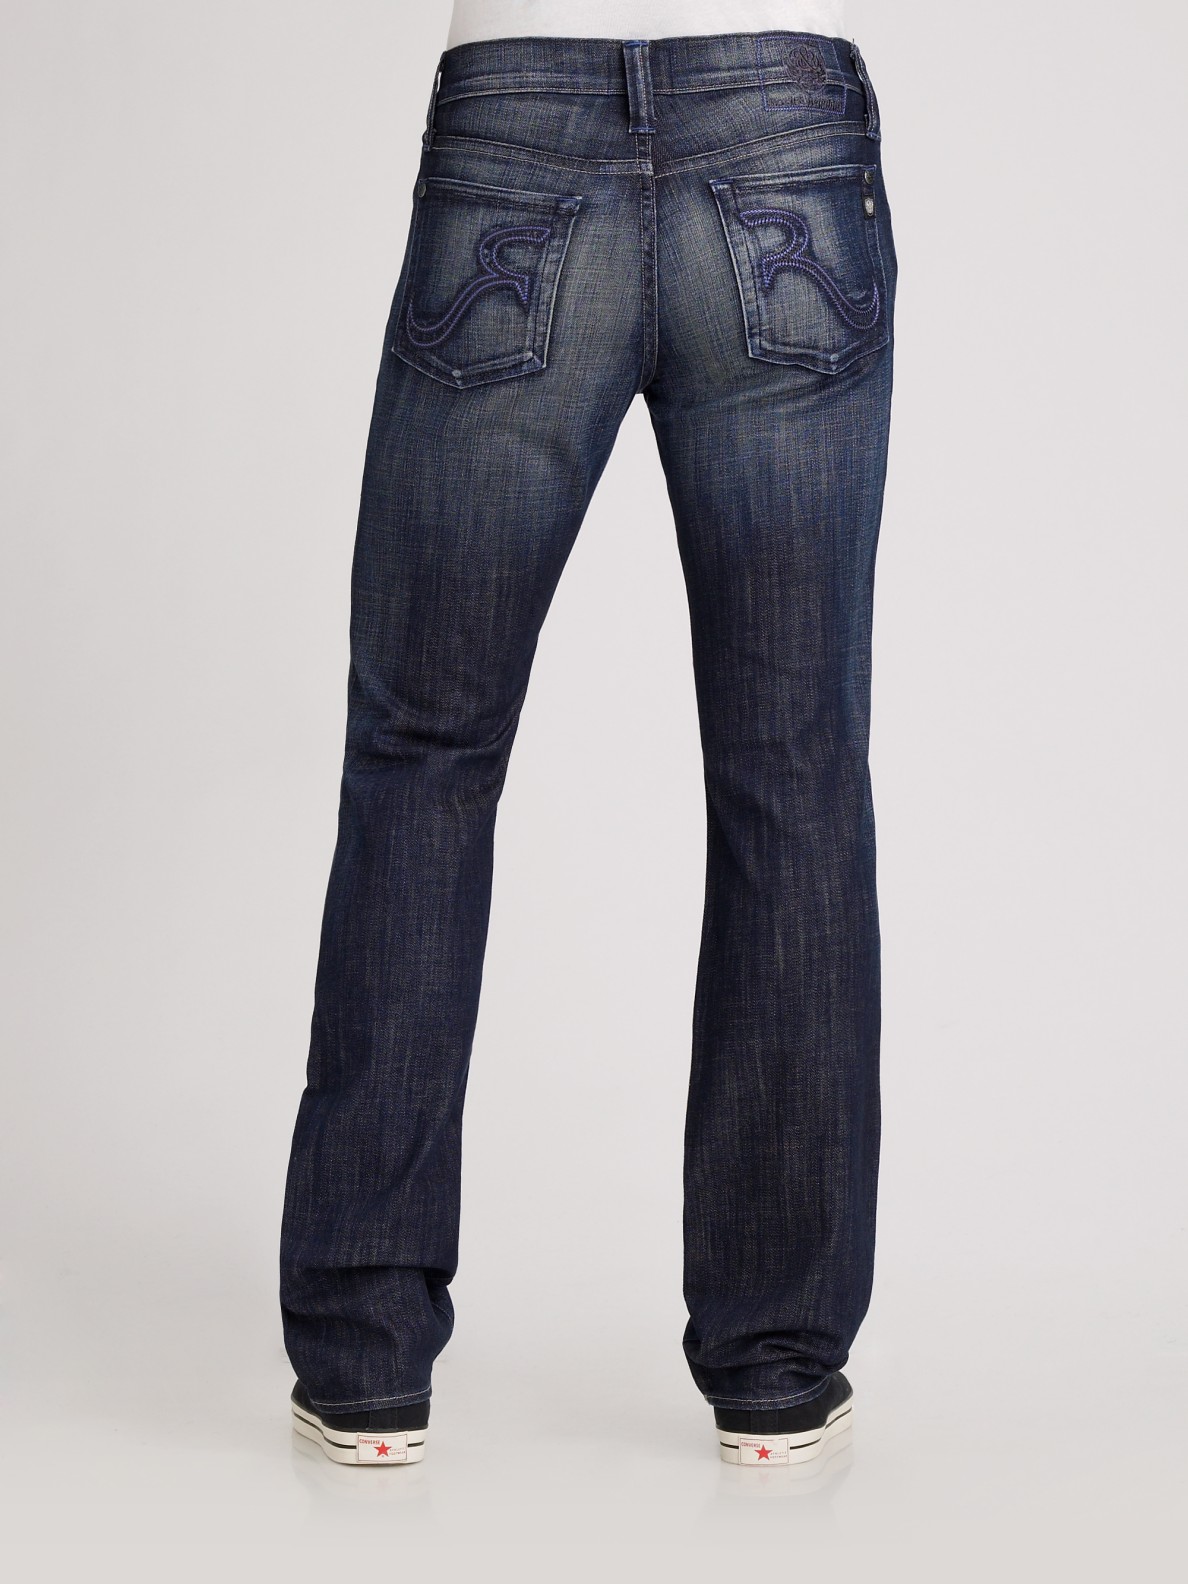 rock and republic neil jeans